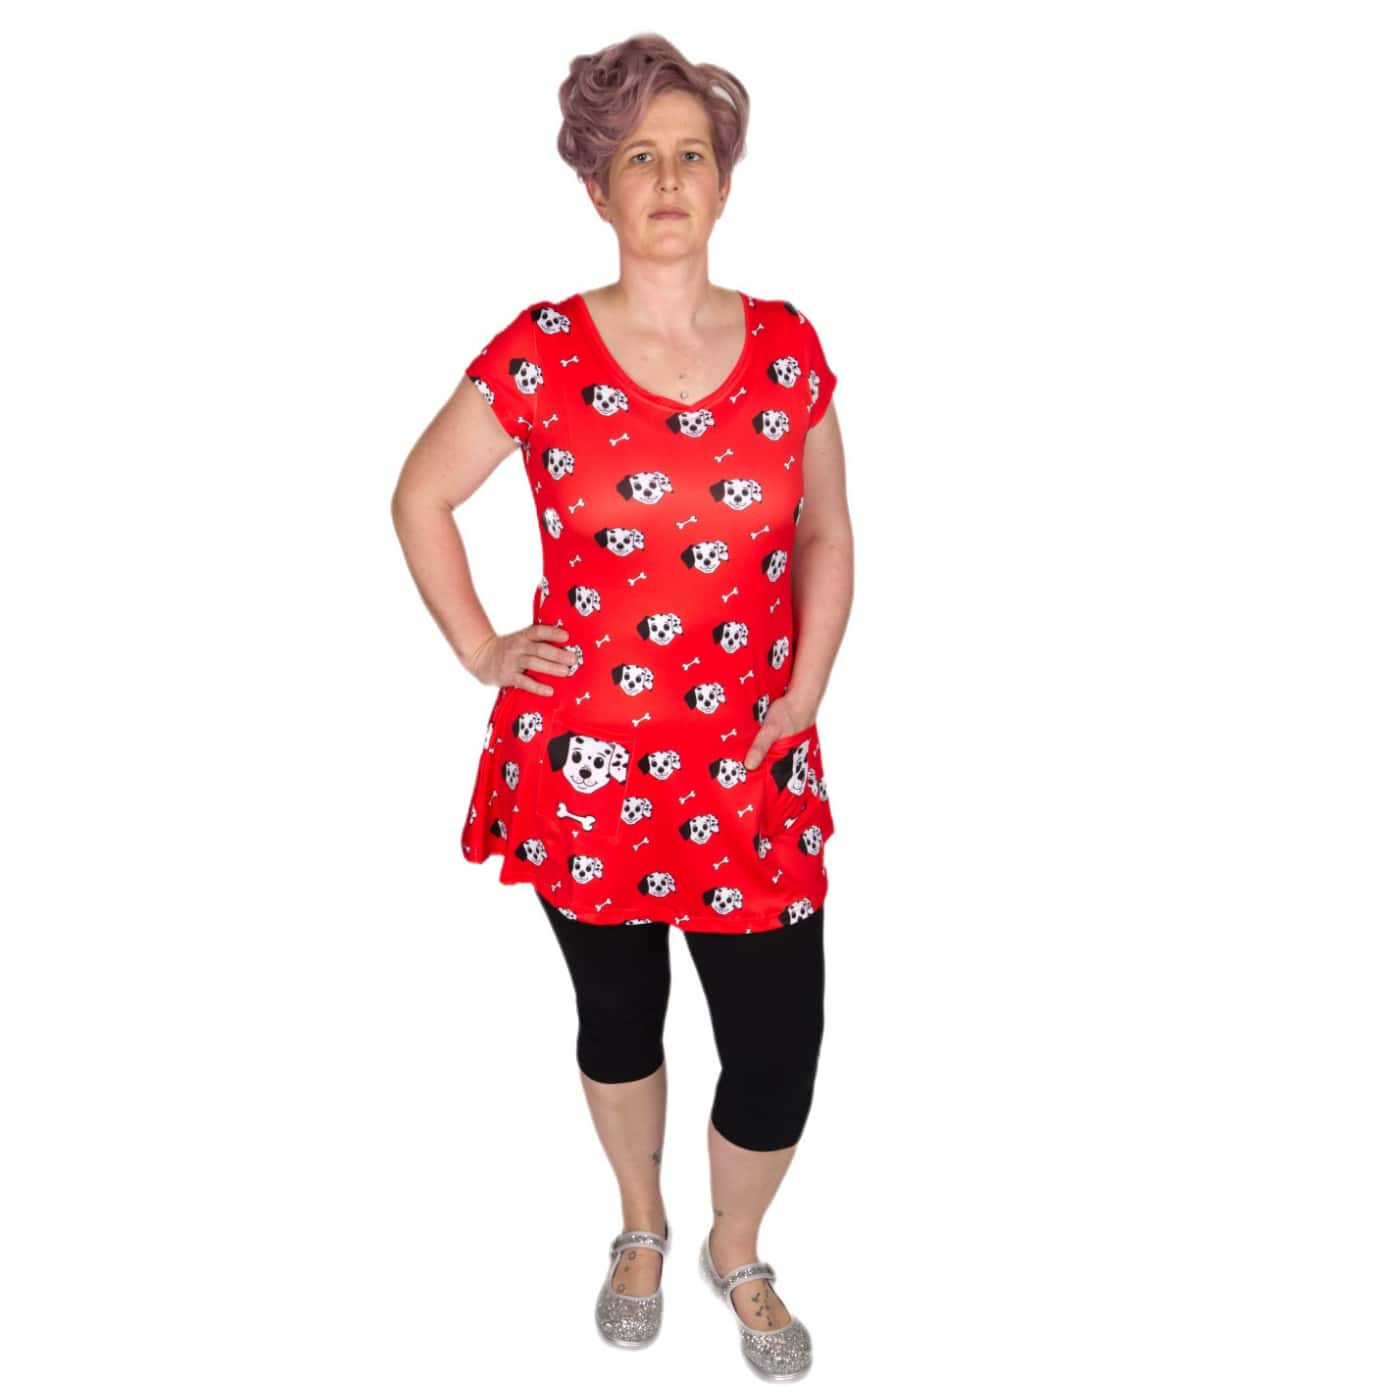 Puppy LoveTunic Top by RainbowsAndFairies.com.au (Dalmation Dog - Dog Bone - Fire Engine Red - Vintage Inspired - Kitsch - Top With Pockets - Mod) - SKU: CL_TUNIC_PUPPY_ORG - Pic-03